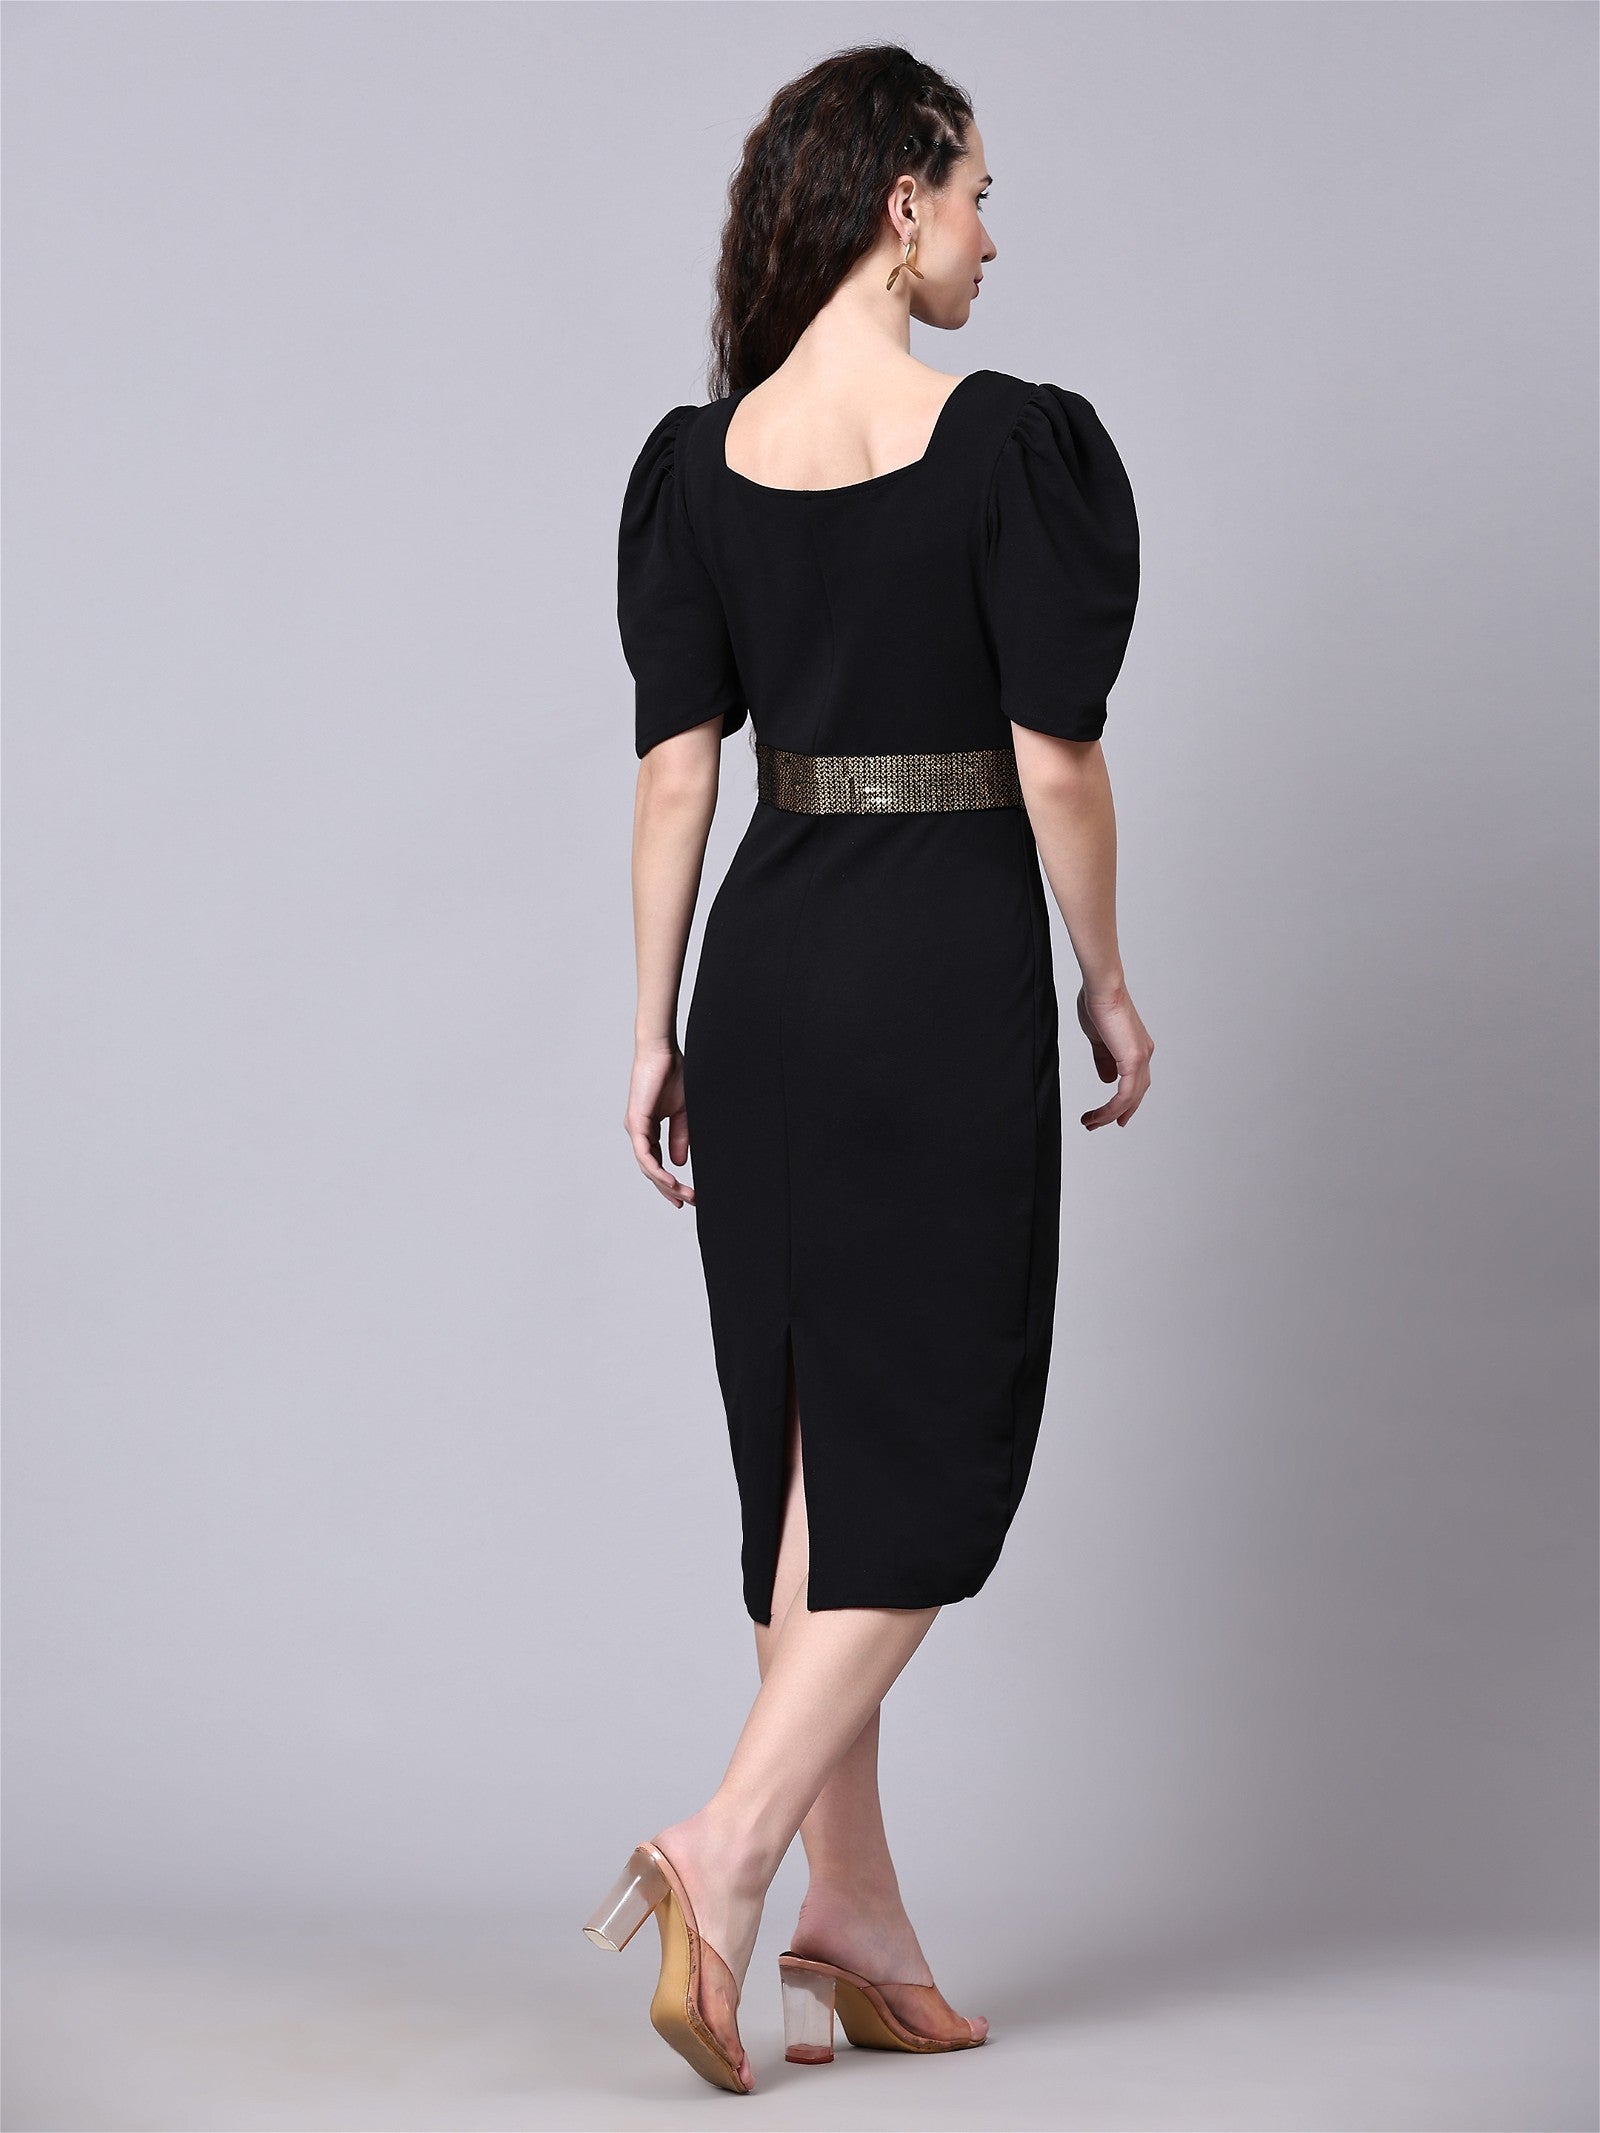 The model in the image is wearing Cotton Lycra top wear collection from Alice Milan. Crafted with the finest materials and impeccable attention to detail, the Dress looks premium, trendy, luxurious and offers unparalleled comfort. It’s a perfect clothing option for loungewear, resort wear, party wear or for an airport look. The woman in the image looks happy, and confident with her style statement putting a happy smile on her face.